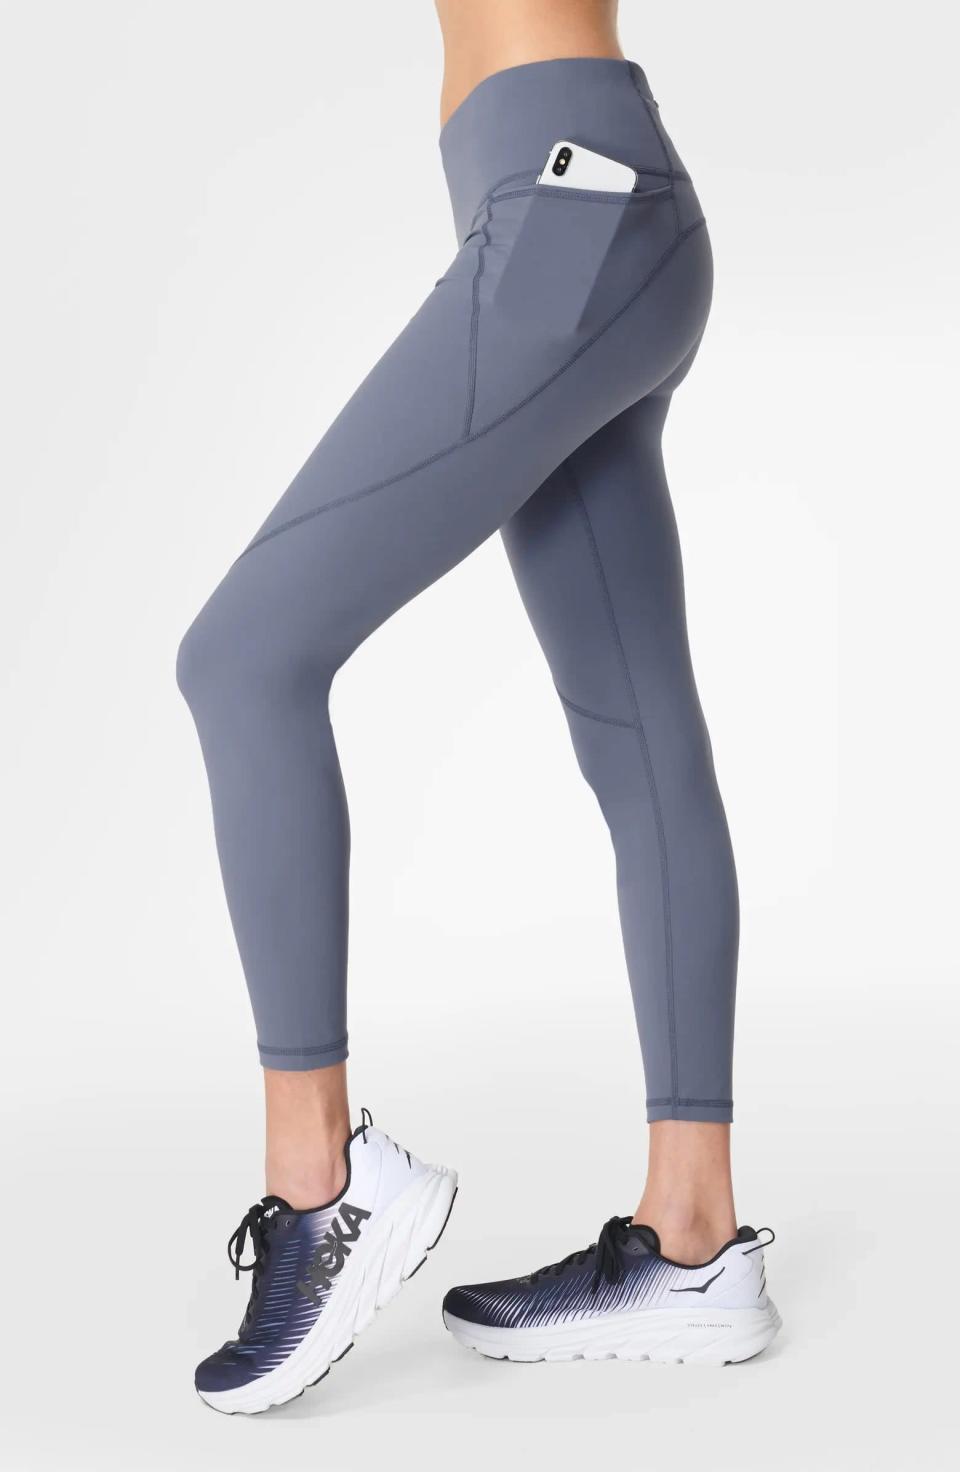 <p>Pockets really do make the world go around. And thanks to these <span>Sweaty Betty Power Pocket Workout 7/8 Leggings</span> ($66, originally $100), you can head out into the world feeling sleek and supported - with deep pockets that allow users to forgo a purse, all while keeping their on-the-go essentials close. </p>